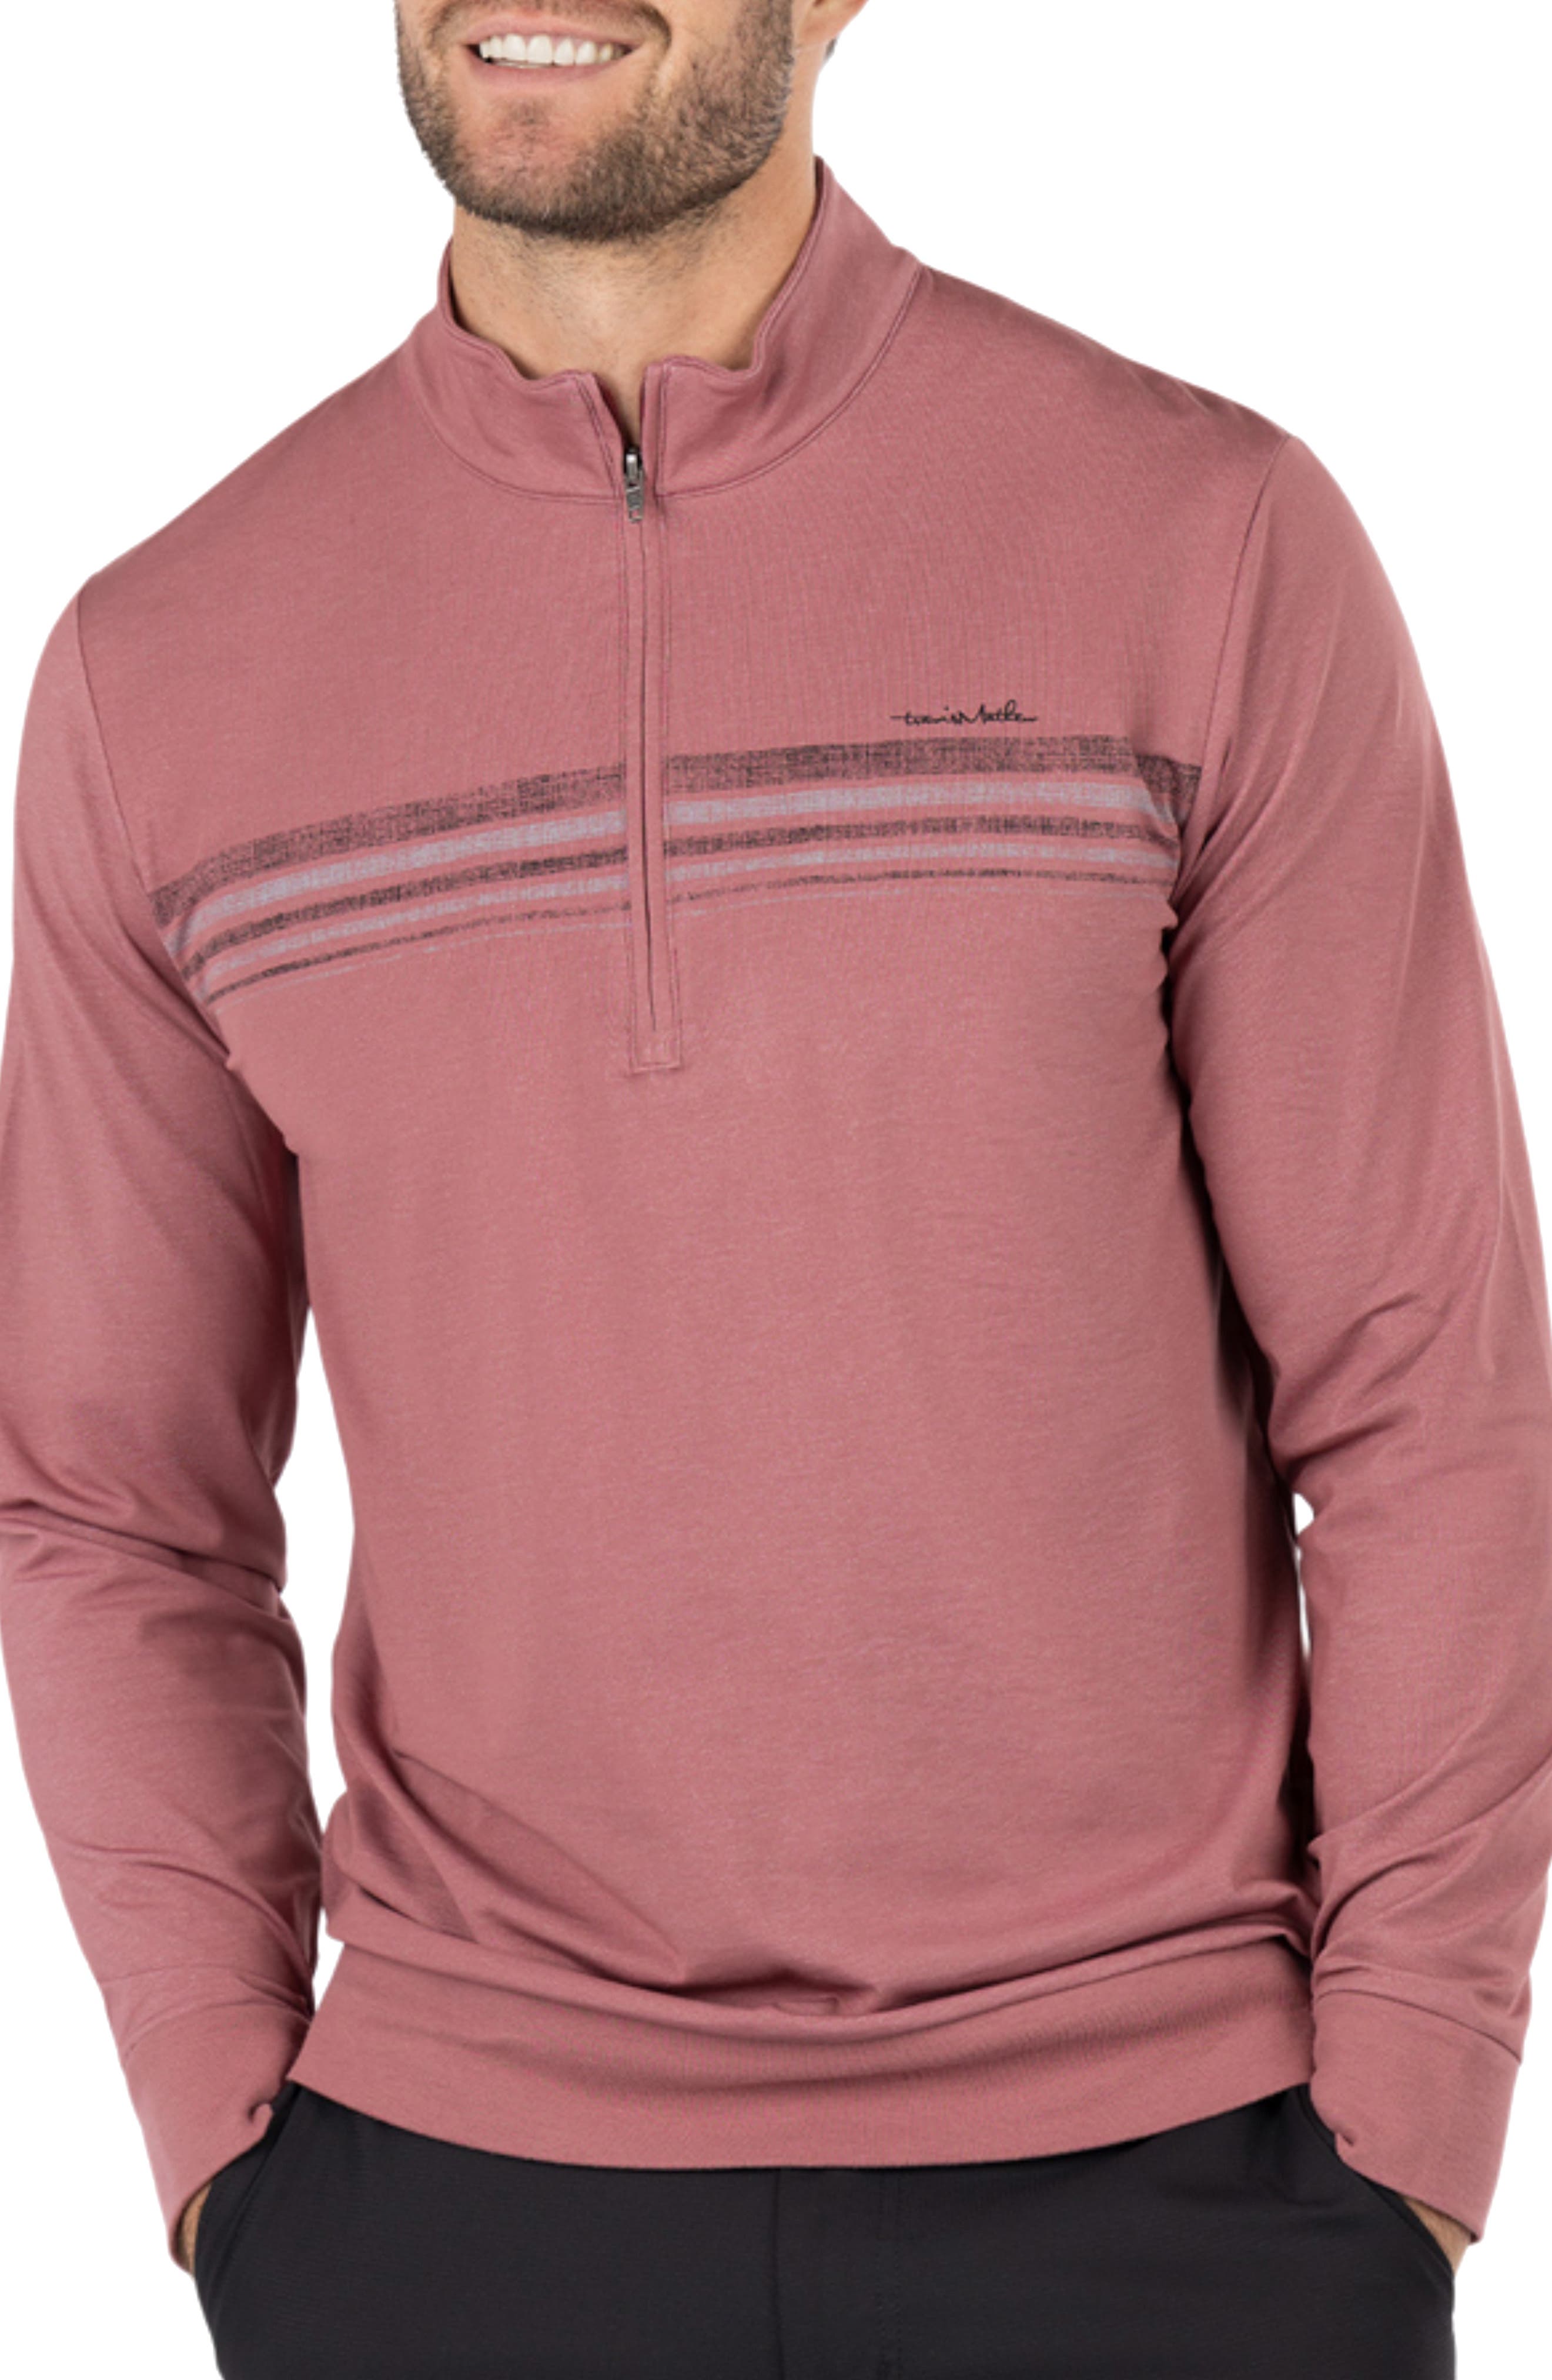 In The Line Up Stretch Cotton Blend Half Zip Pullover | research.engr ...